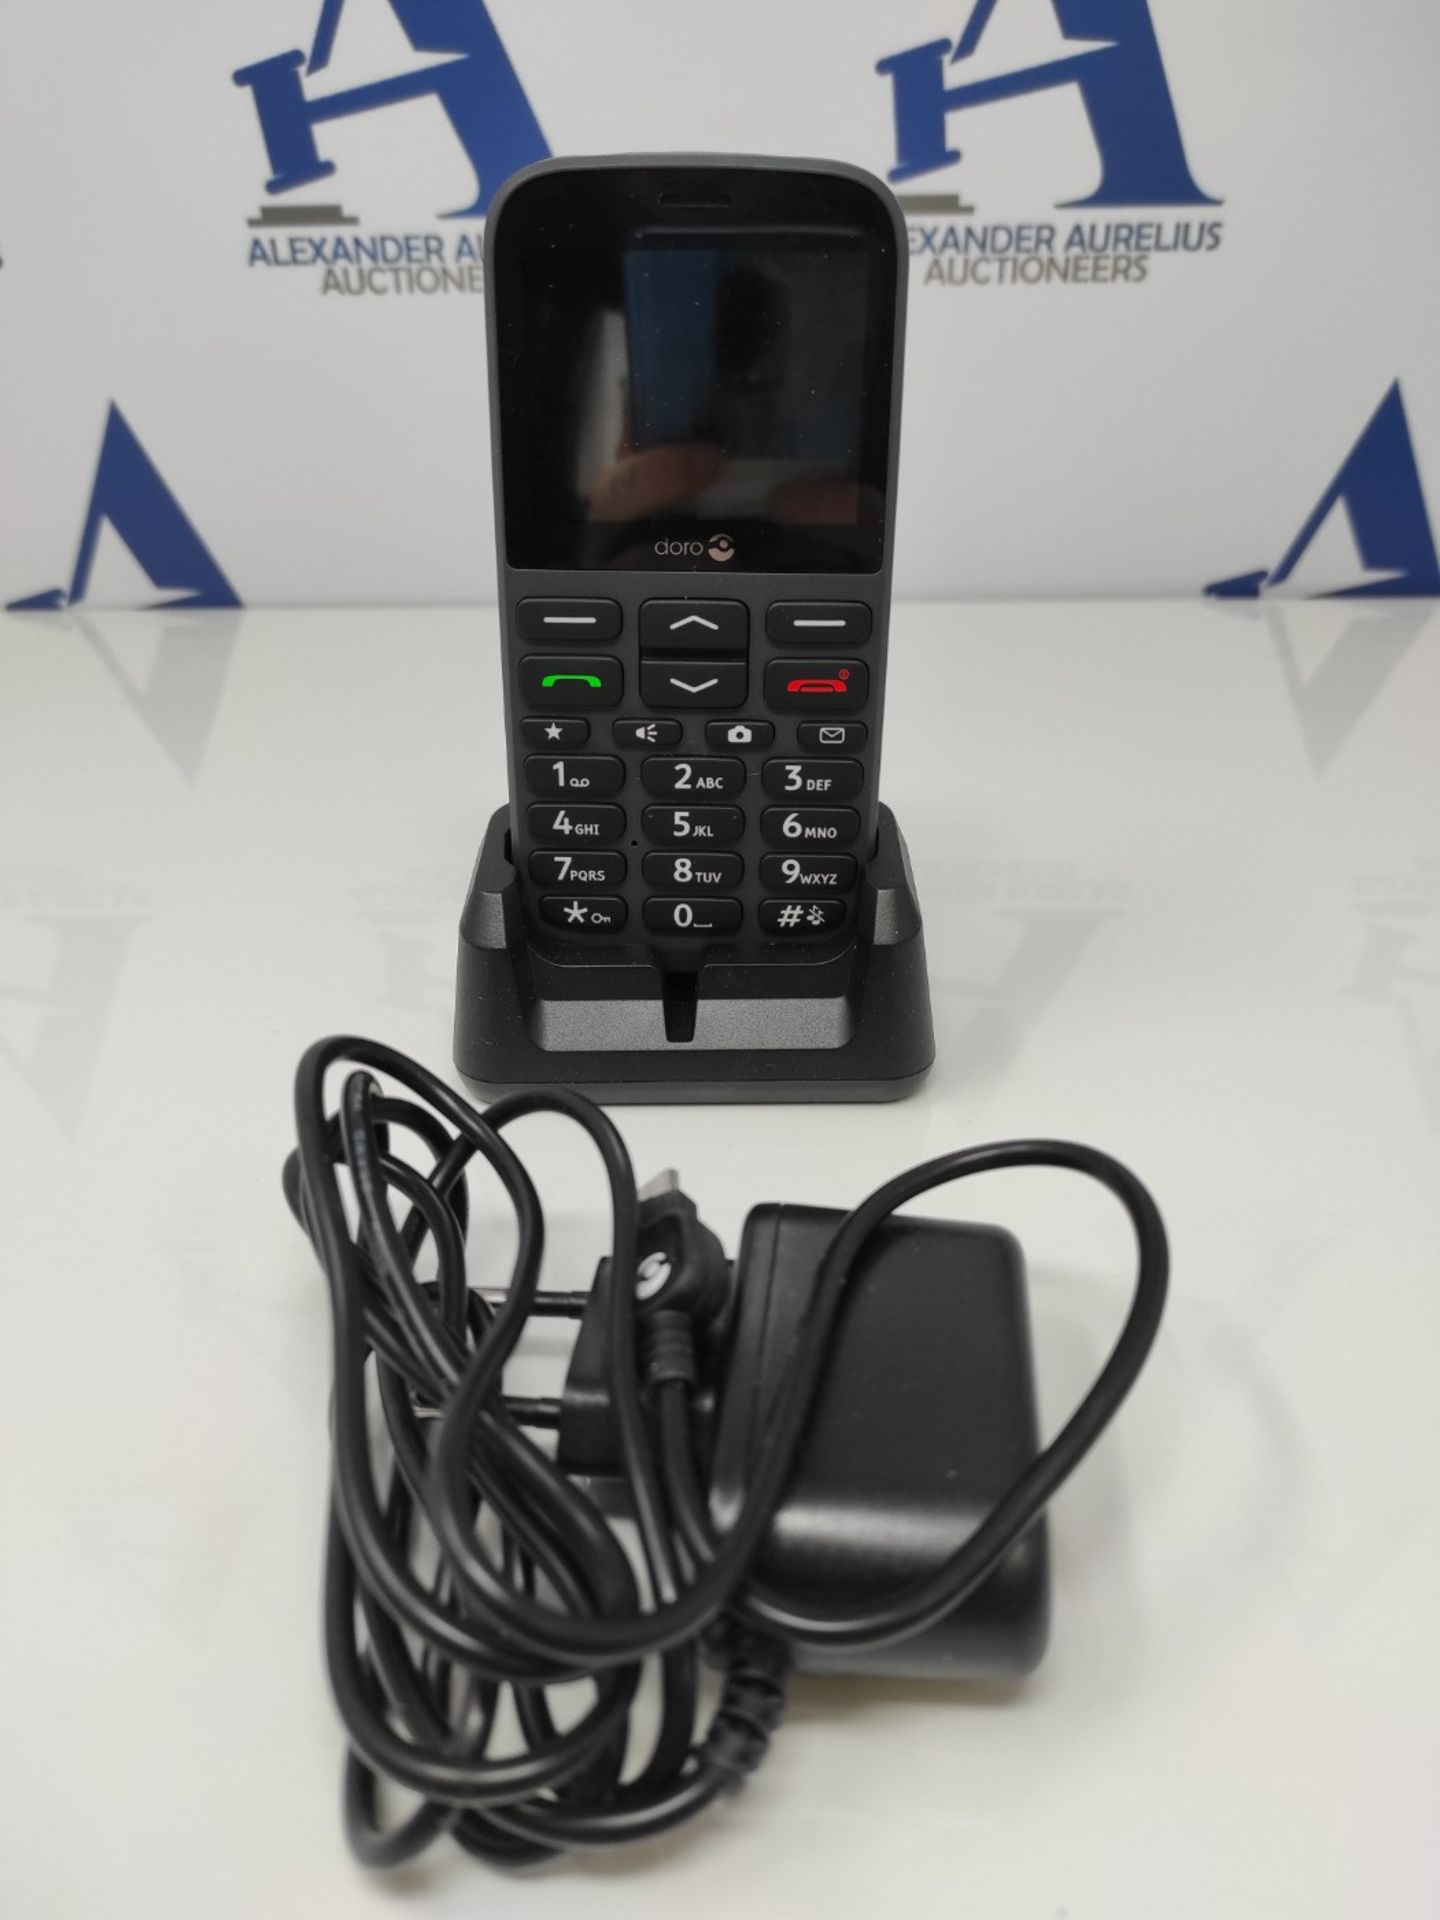 Doro 1370 GSM mobile phone with camera (3 MP, HAC, Bluetooth), anthracite - Image 3 of 3